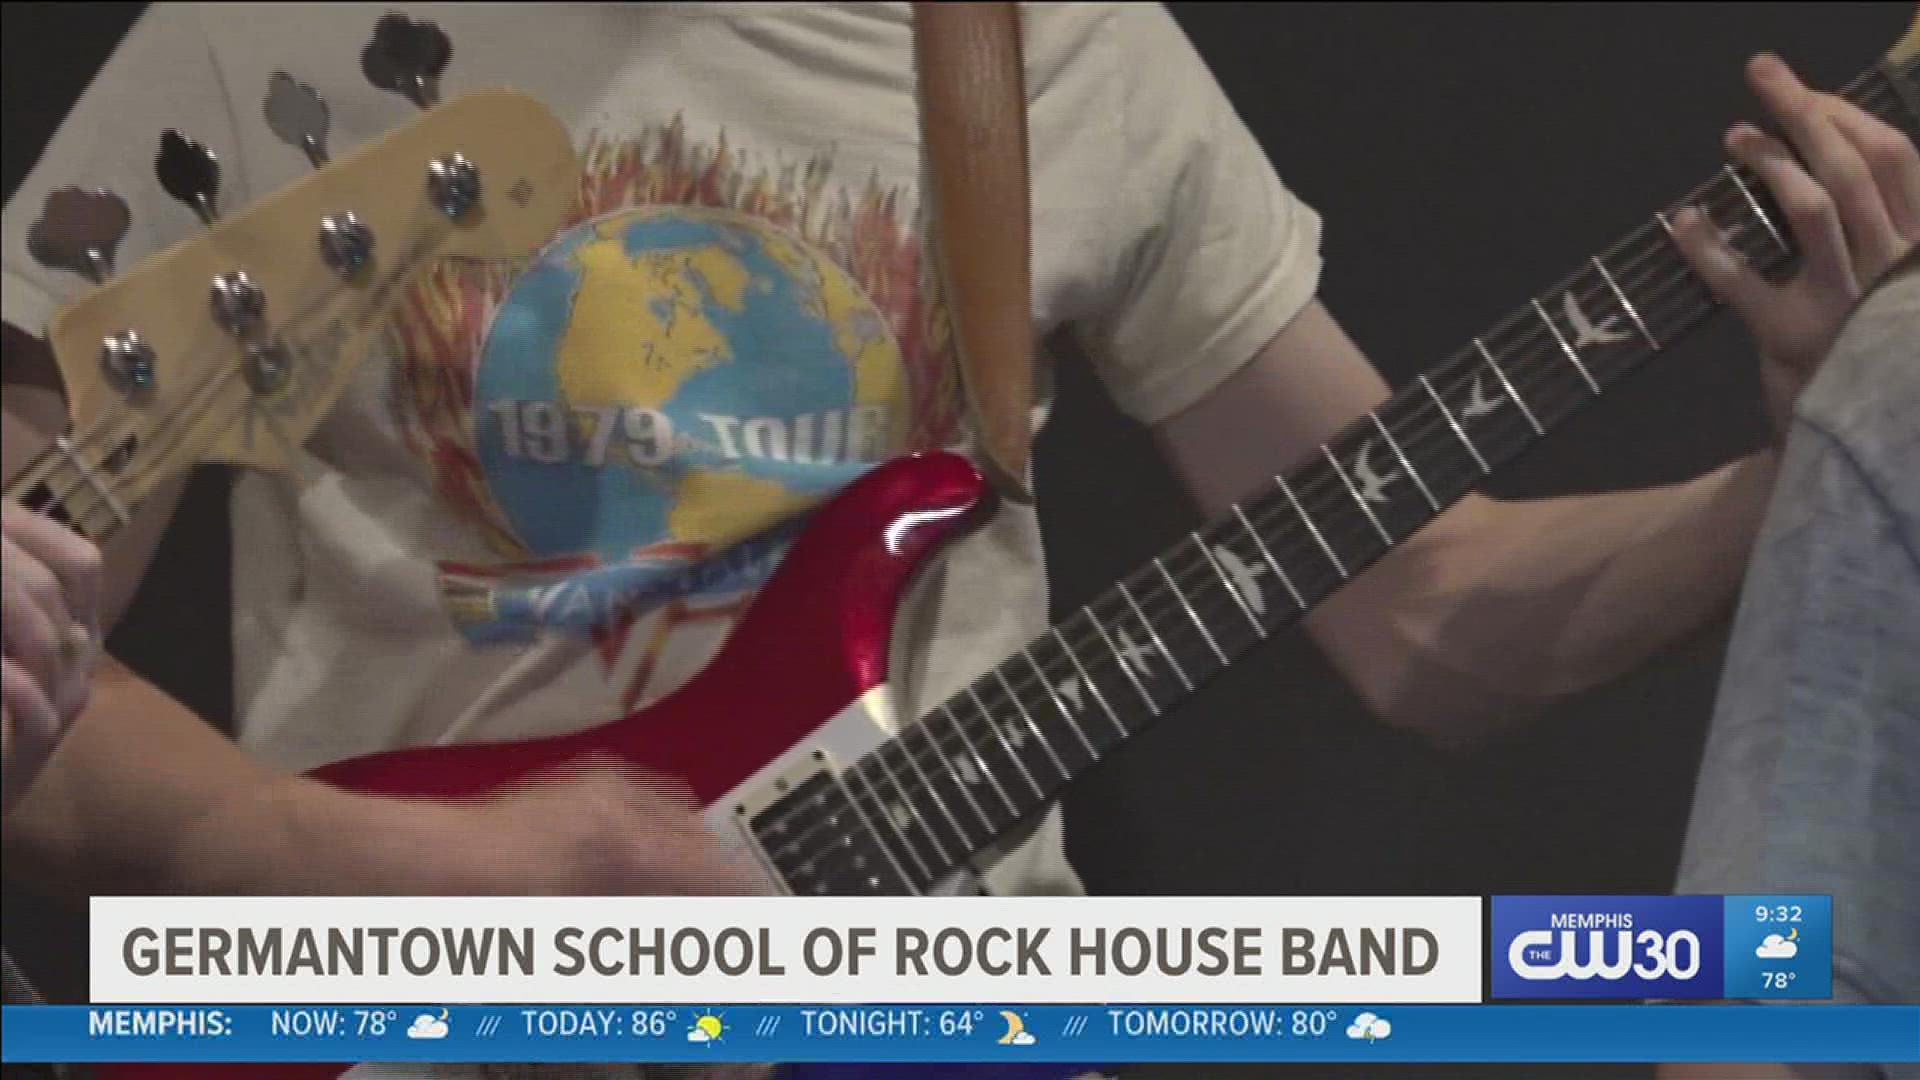 The Germantown School of Rock House Band is set to perform at a very popular music festival in Portugal.